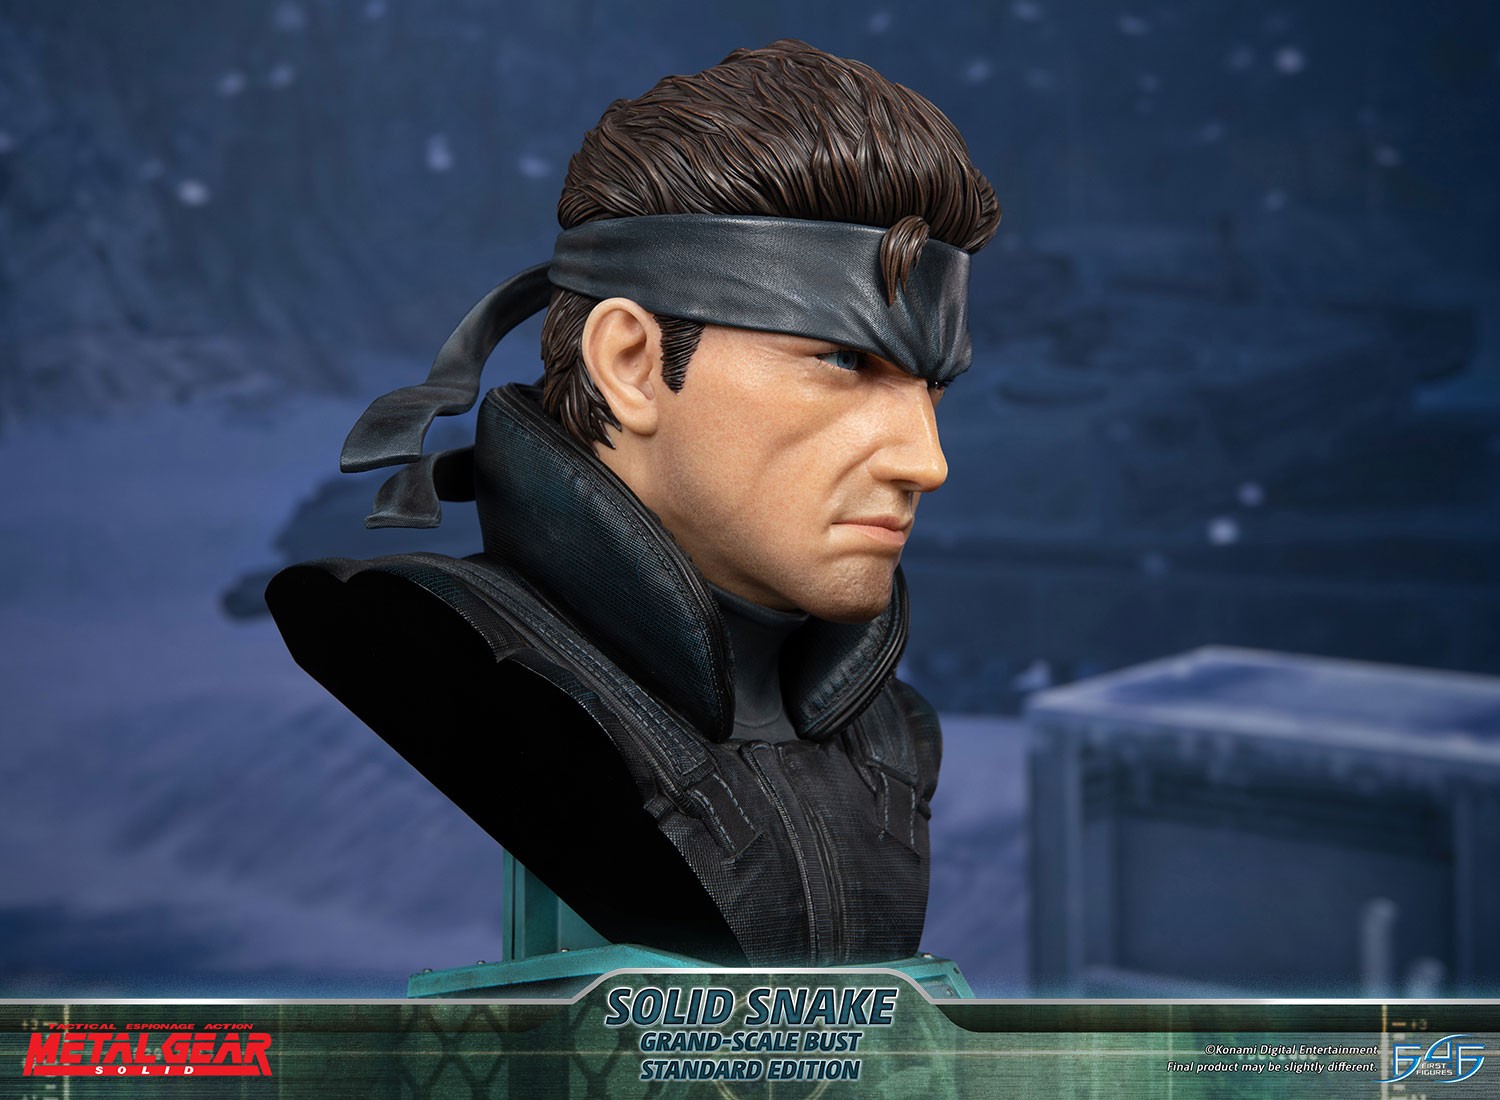 Metal Gear Solid - Solid Snake Grand-Scale Bust (Standard Edition GSB)